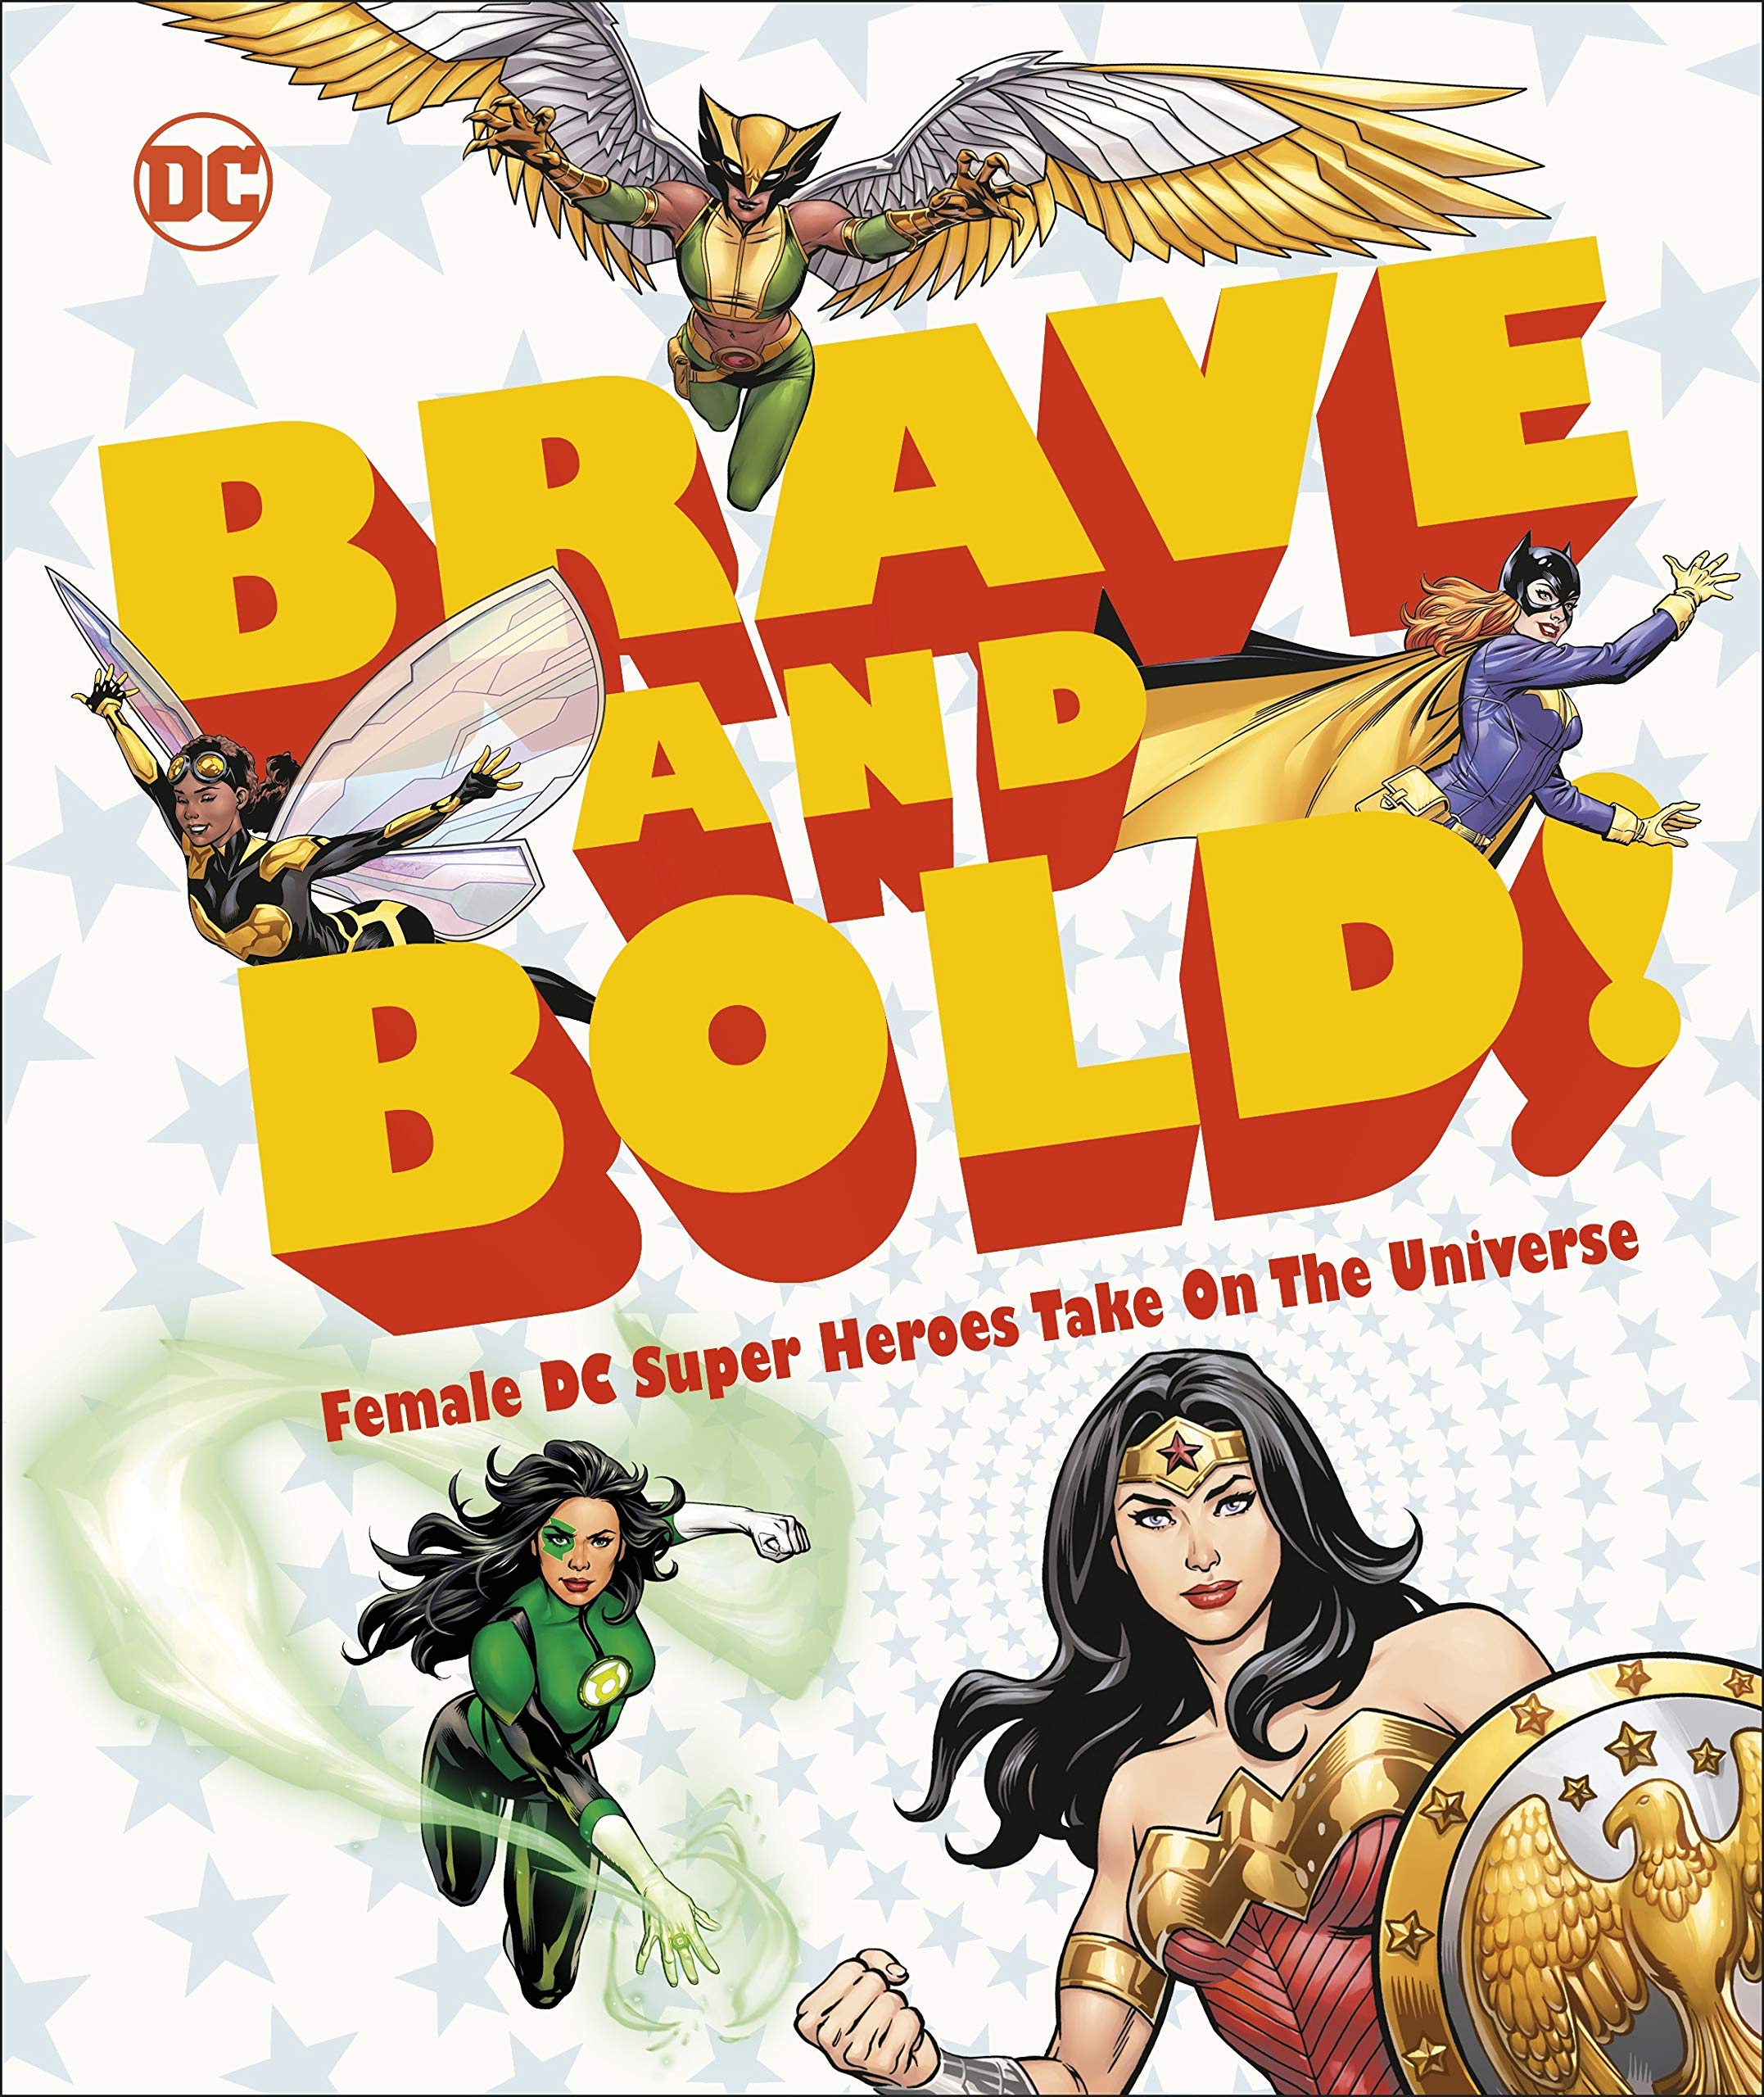 DC Brave and Bold! | Sam Maggs